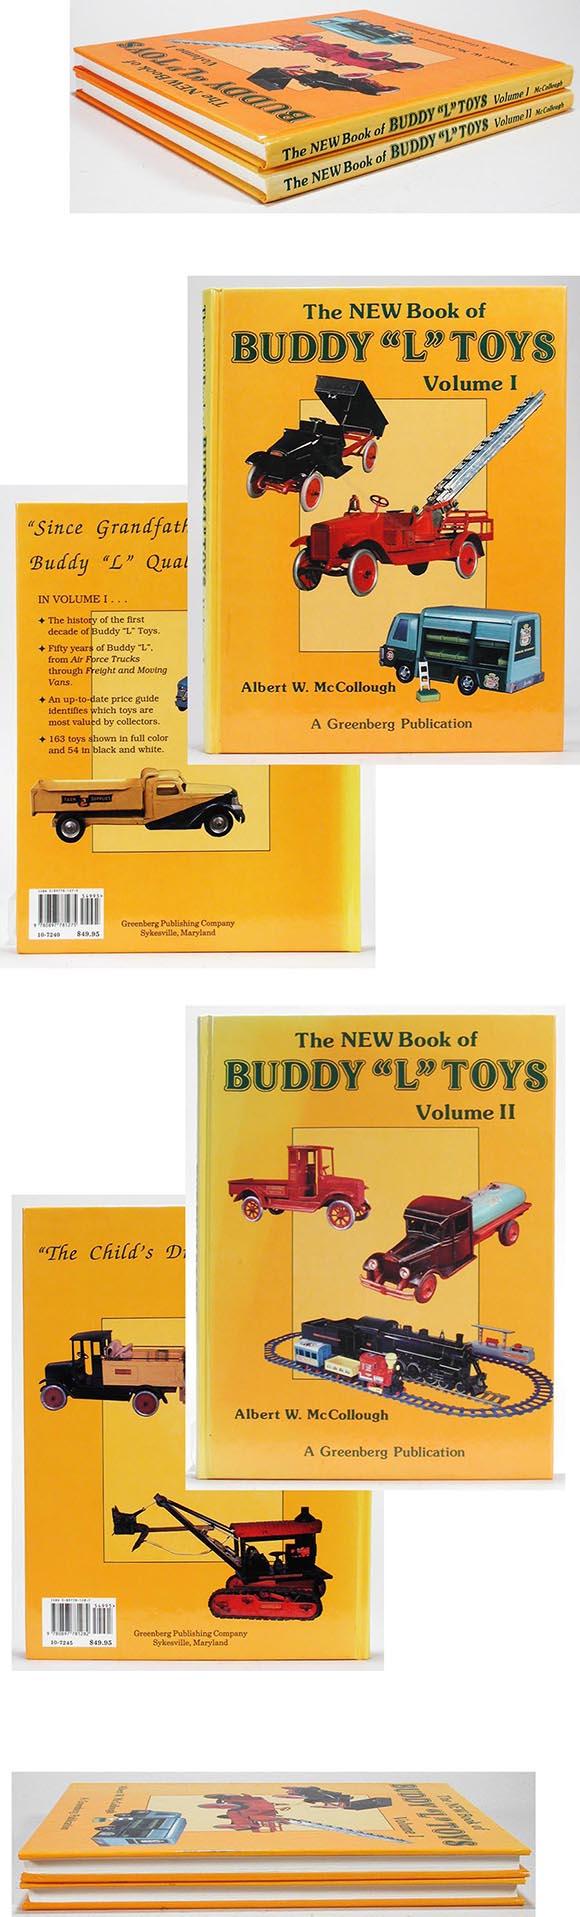 1991 Complete 2 Volume Set: The NEW Book of Buddy 